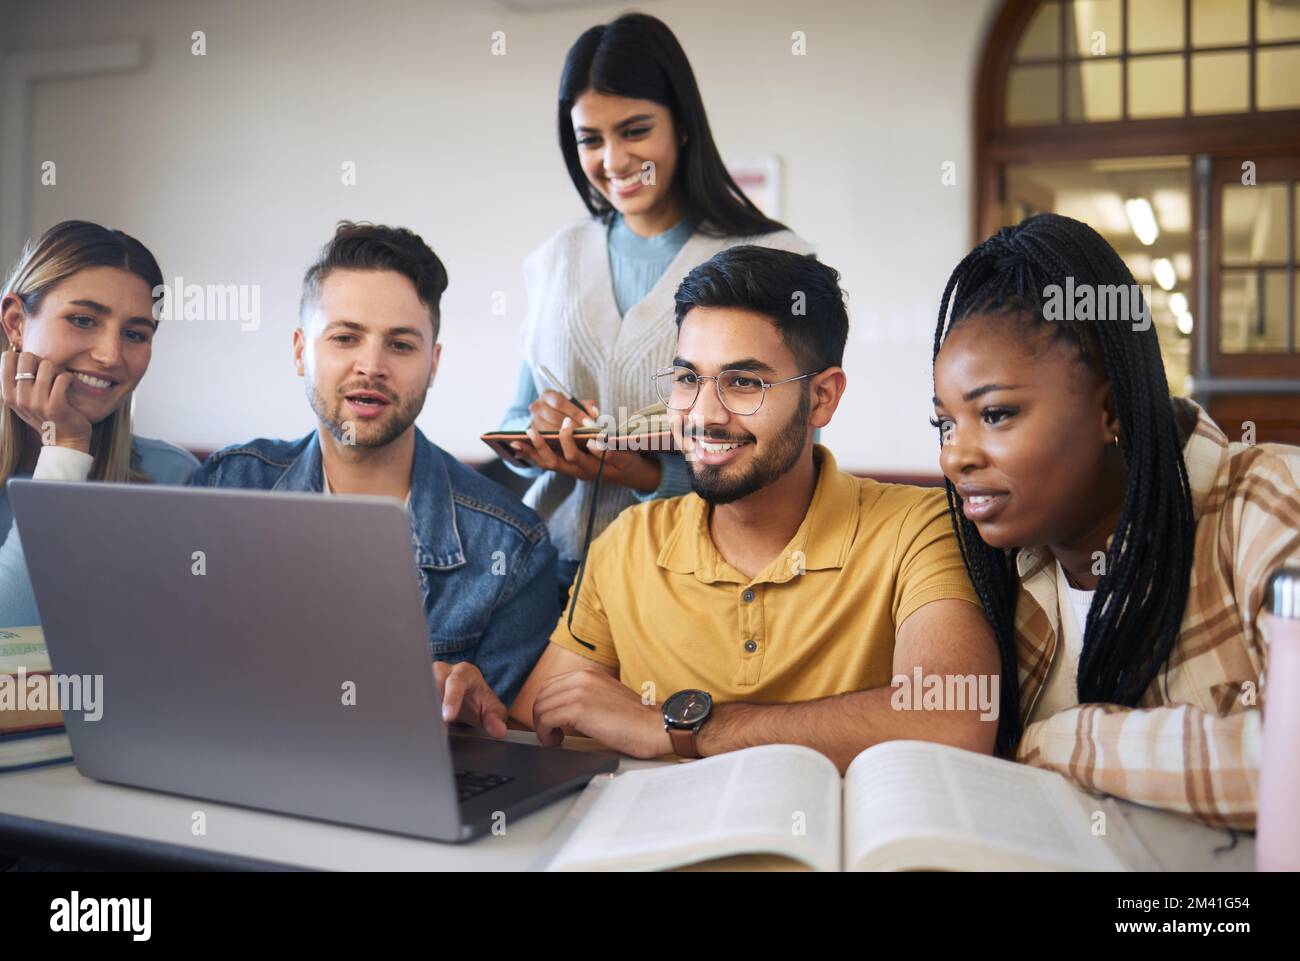 Laptop, study and students with group project for online course, e learning and education with diversity, happy and teamwork. Research video, studying Stock Photo